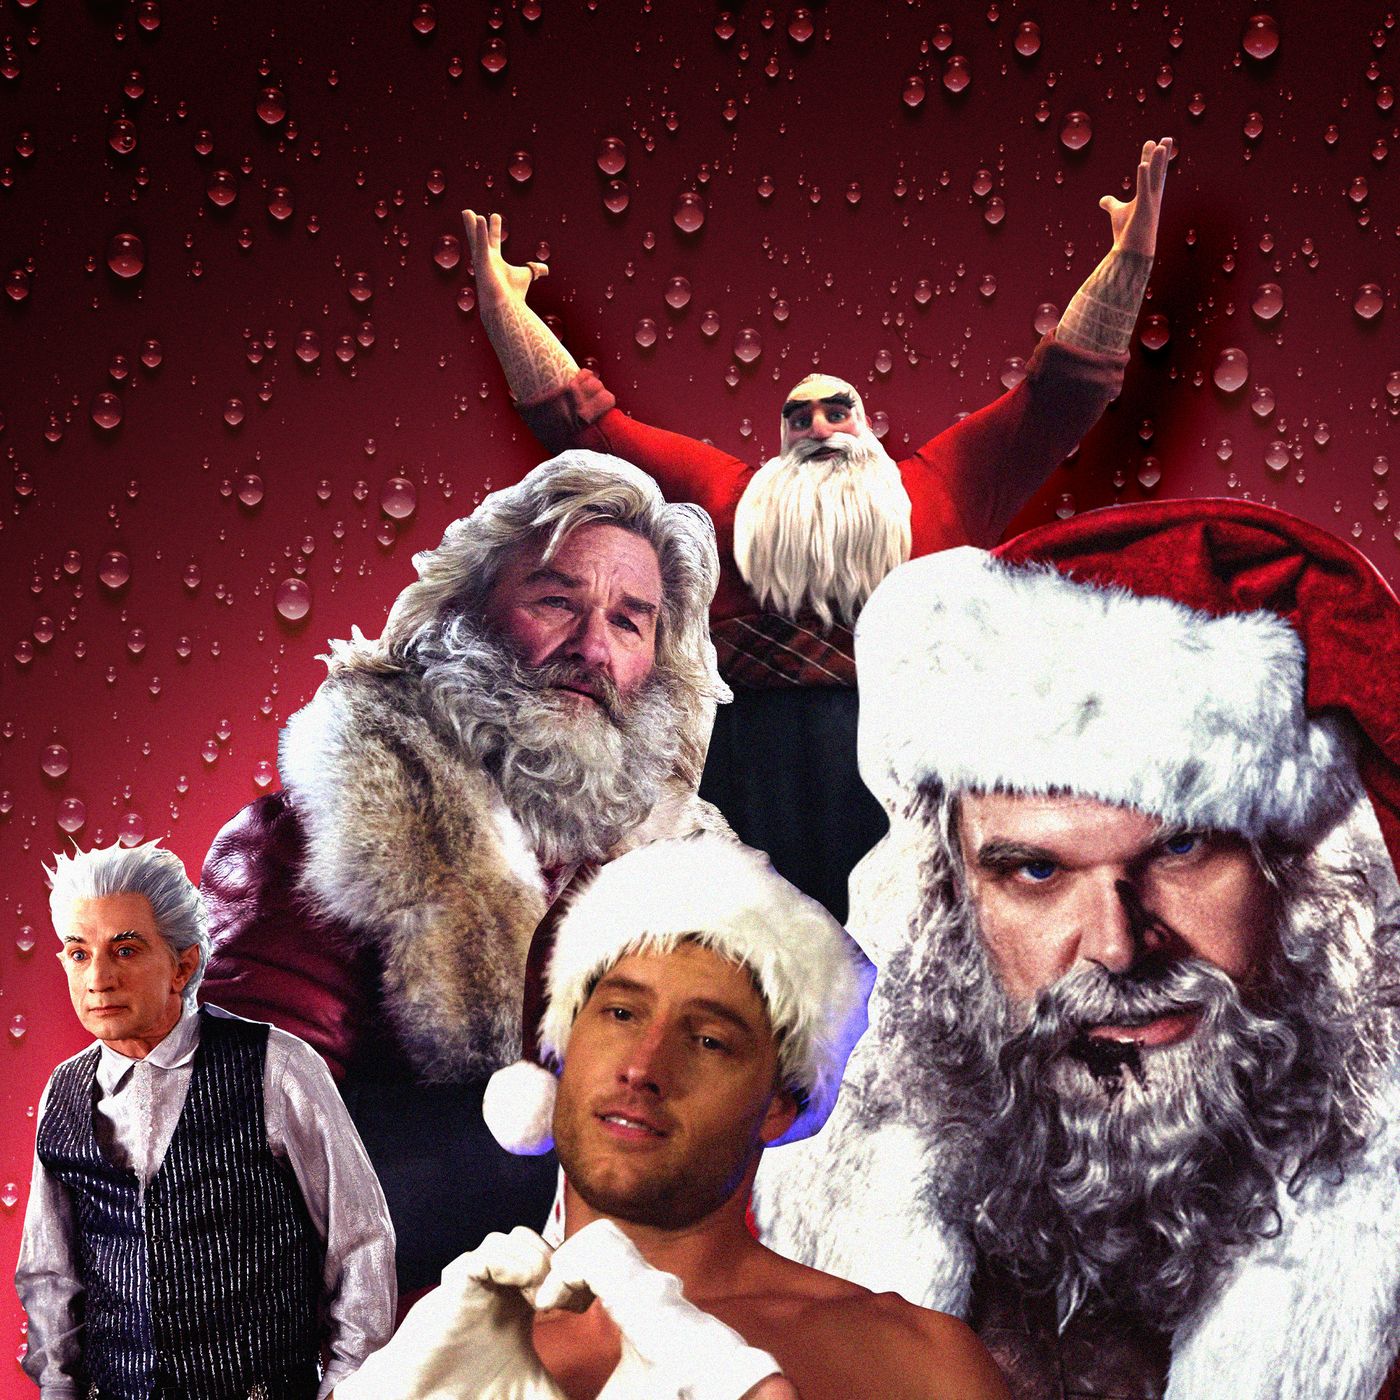 Naughty America 2girls And 1 Boy - The 15 Hottest Hot Santas in Christmas Movies